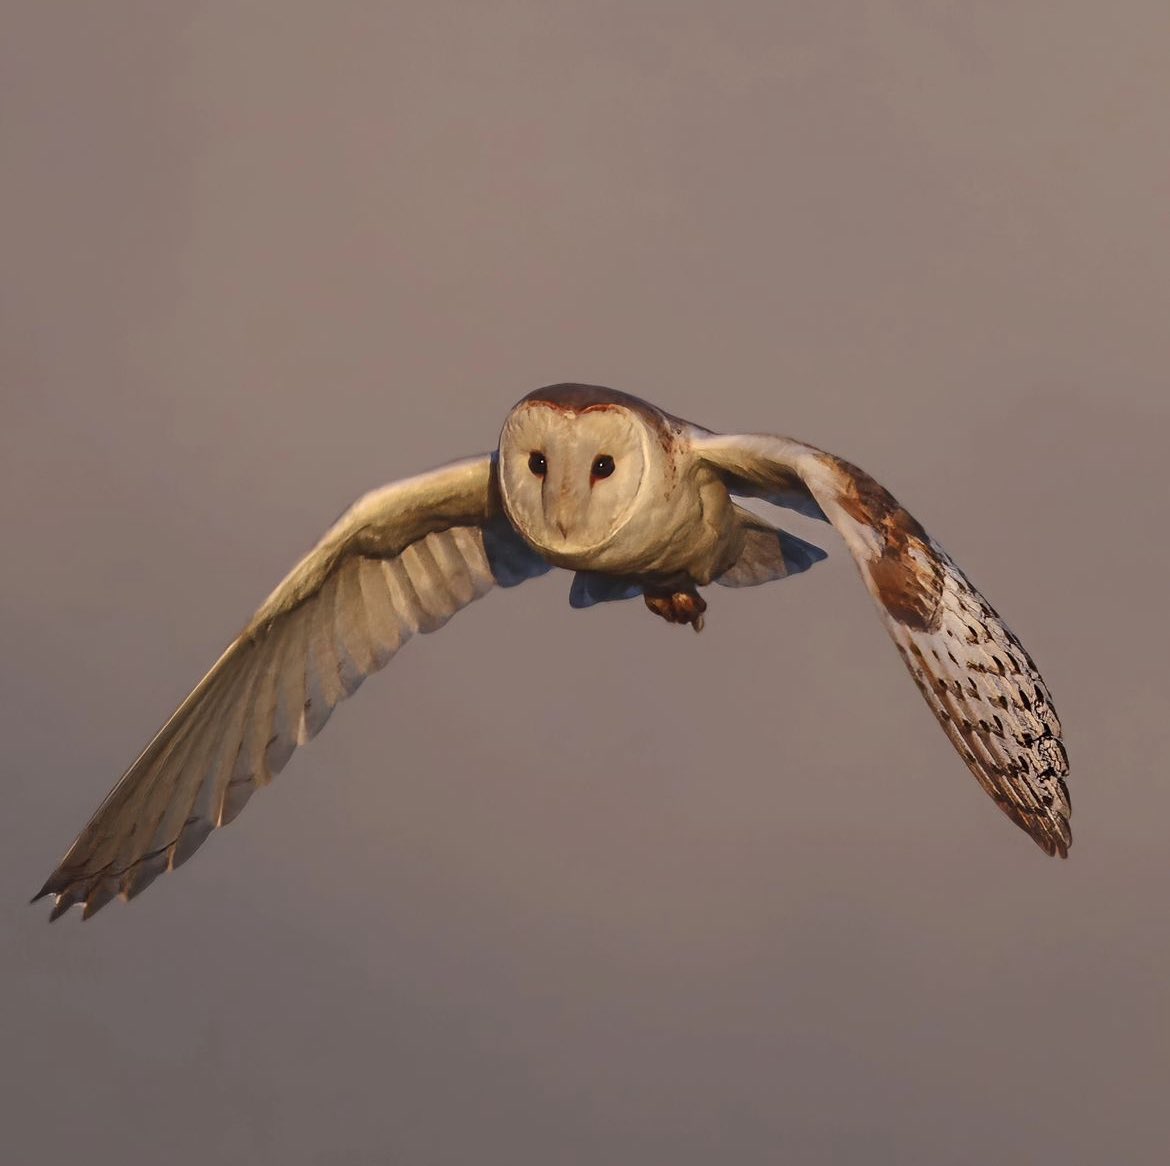 A super image of a barn owl in flight, captured by Instagrammer juliewilkinsonphotography 

linktr.ee/juliewilkinson

#sheclicksnet #femalephotographers #women #photography #femalephotographer #naturephotography #wildlifephotography #birdphotography #owl #barnowl #goldenhour